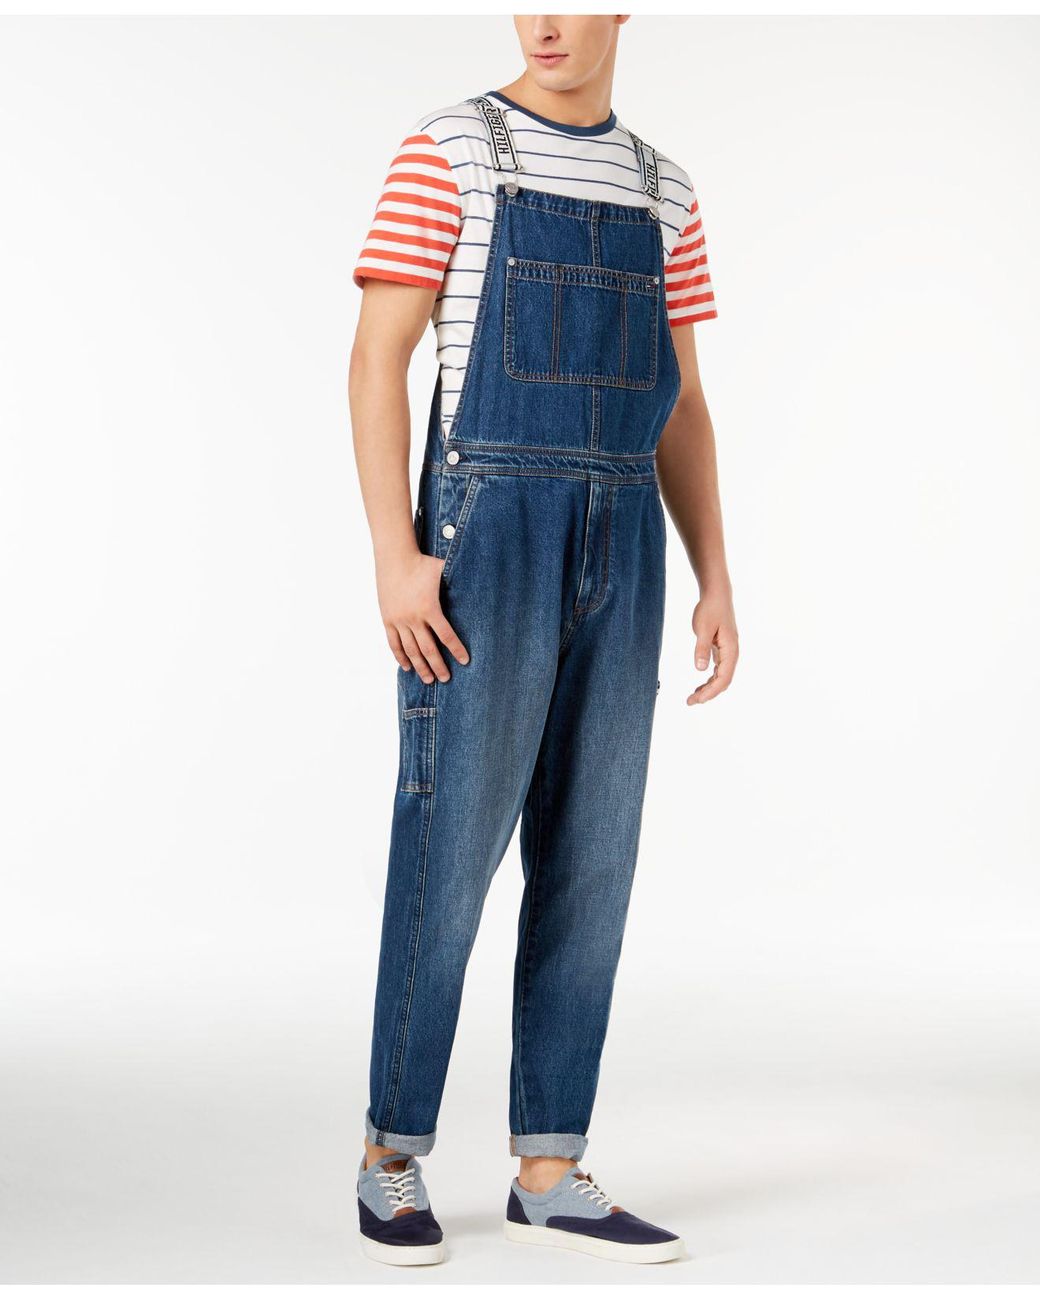 Tommy Hilfiger Denim Overalls in for | Lyst